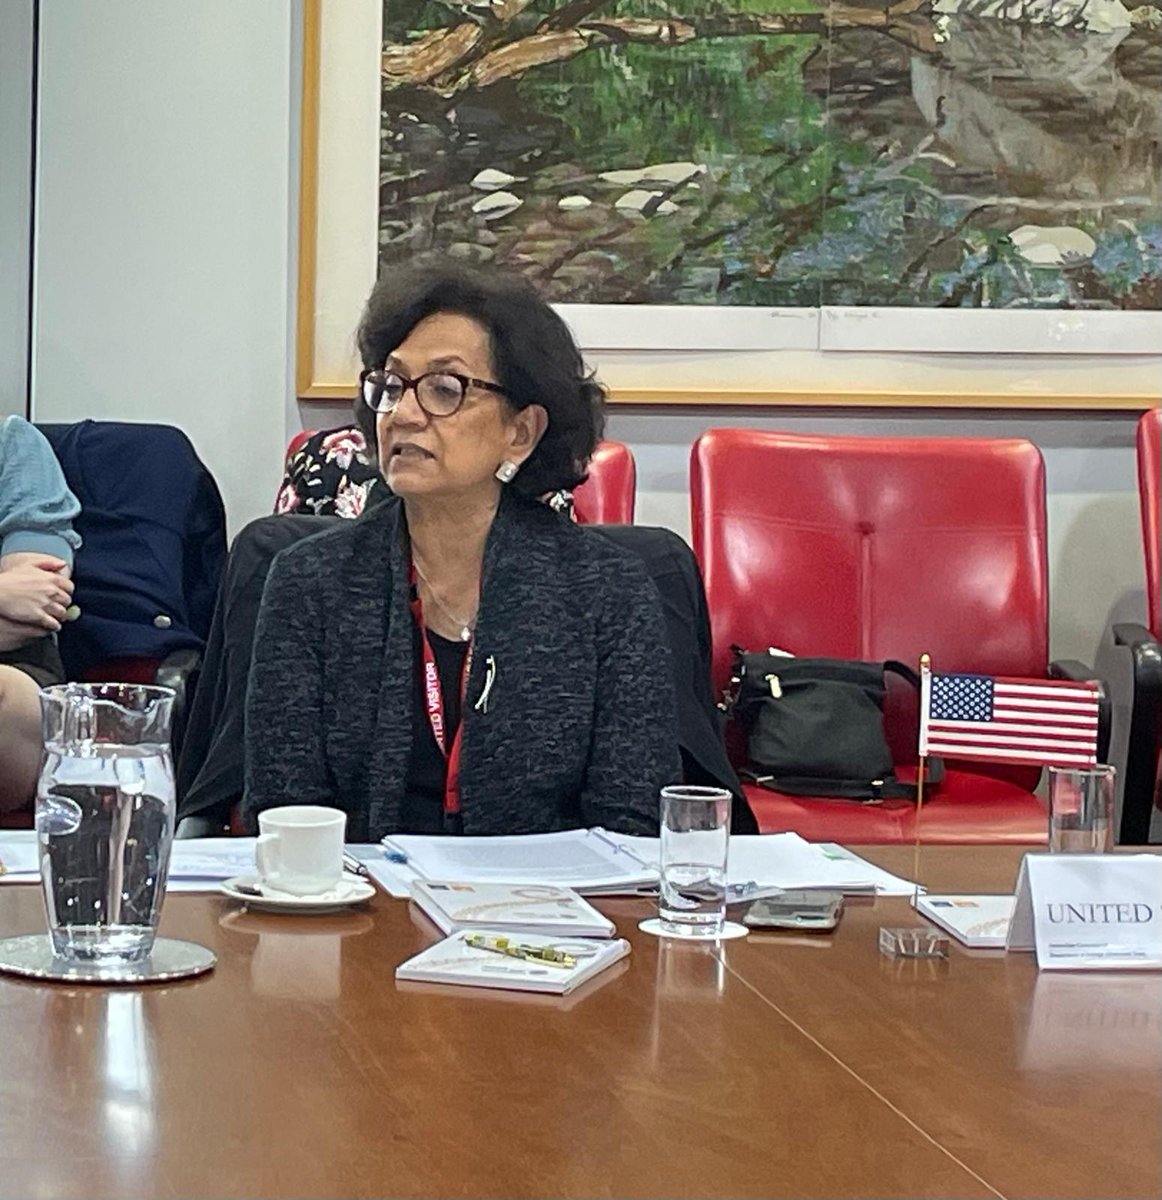 Ambassador Rao Gupta continues her travel to Australia 🇦🇺where she joined an important discussion on #AtrocityPrevention & #CRSV prevention efforts with like-minded partners. CRSV is NOT inevitable!